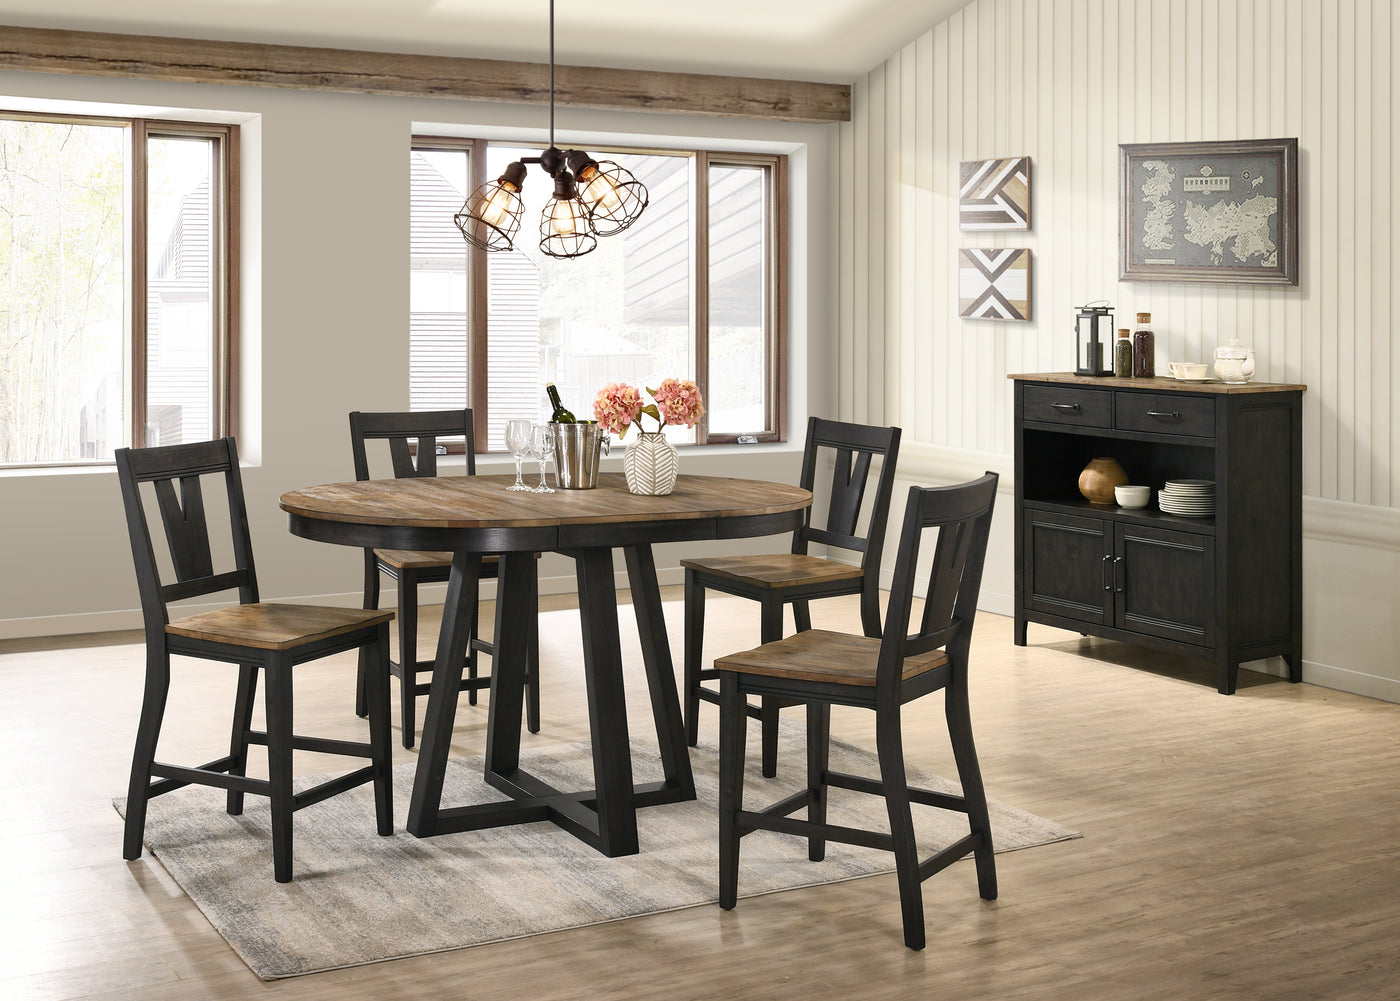 Addie Extendable Counter Height Dining Table - Brown